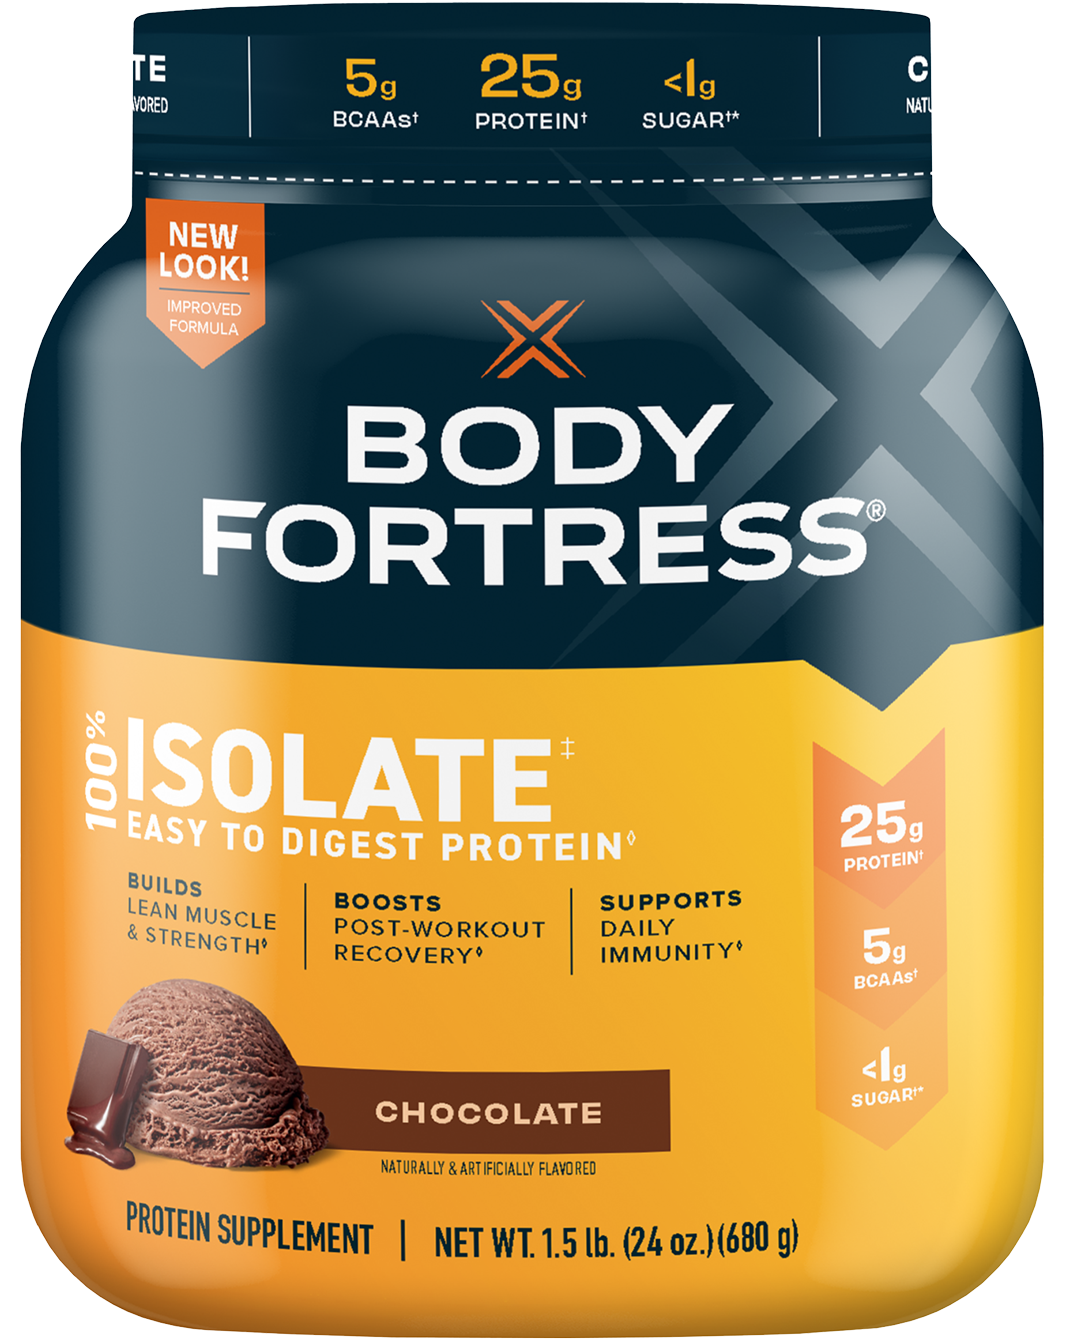 100% Isolate, Easy to Digest Protein Powder, Vanilla – Body Fortress